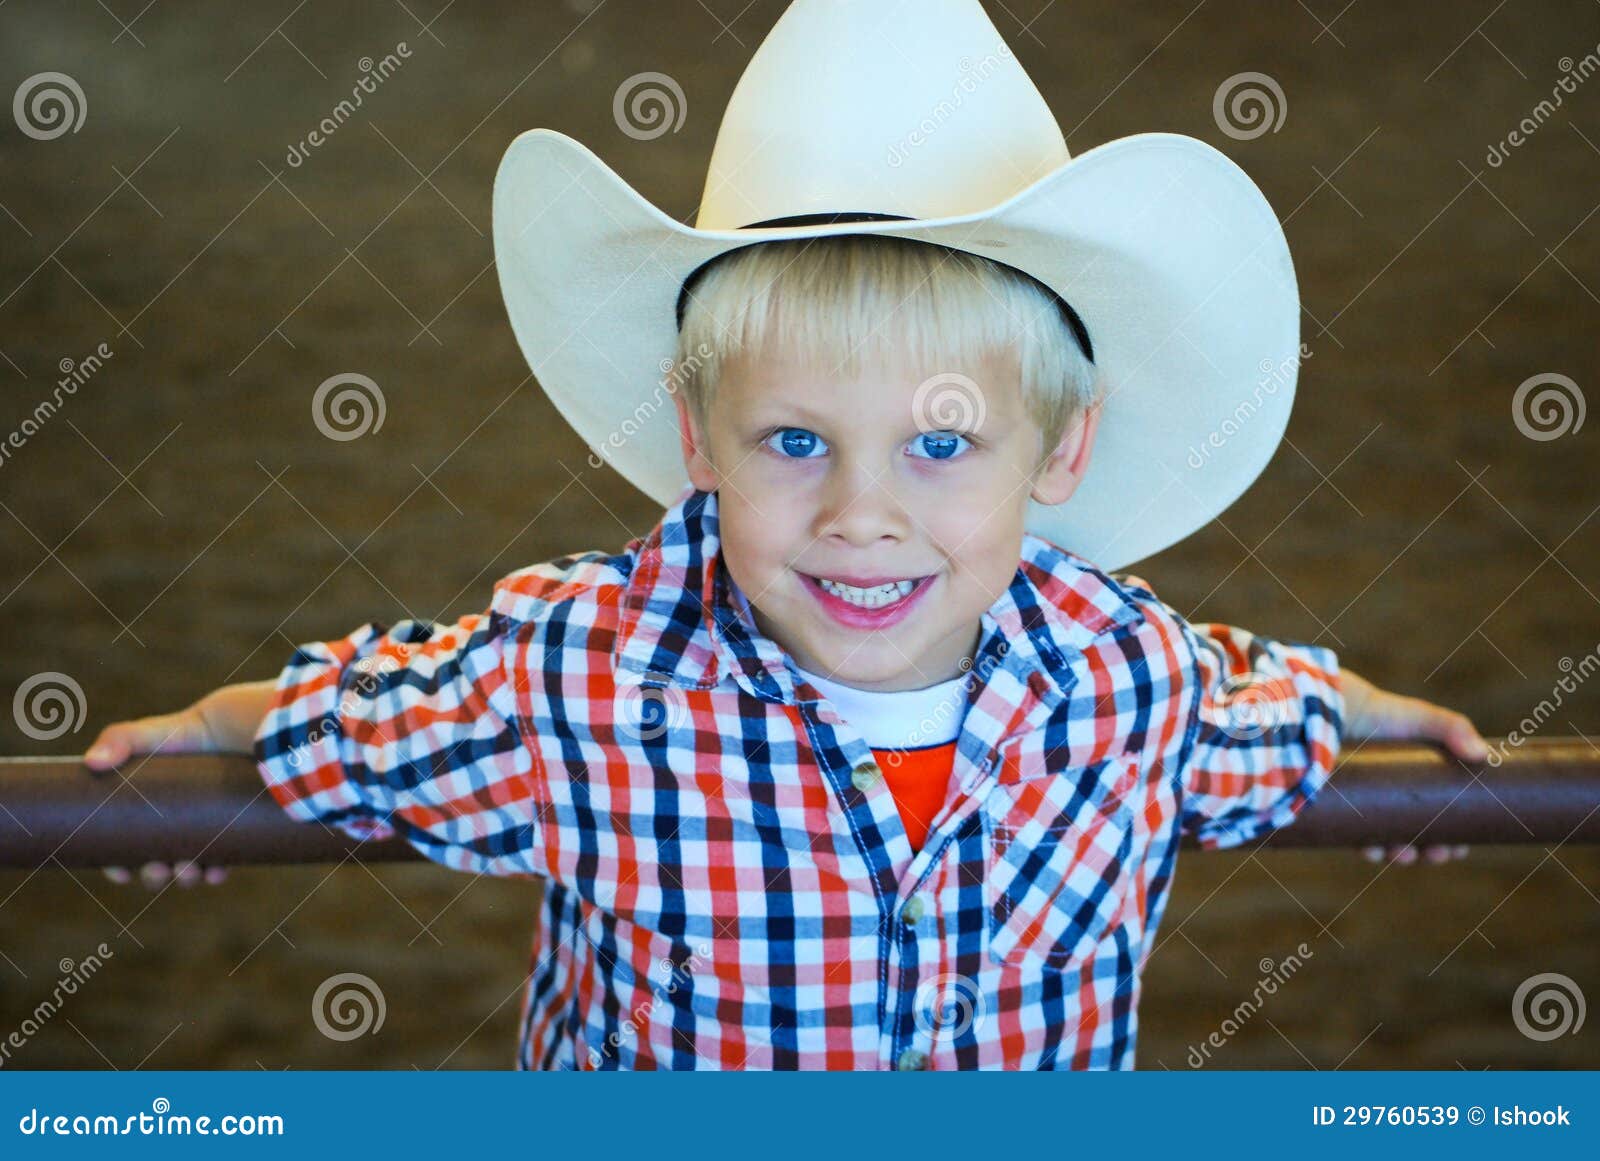 4. Rugged Cowboy with Blue Eyes and Copper Hair - wide 3